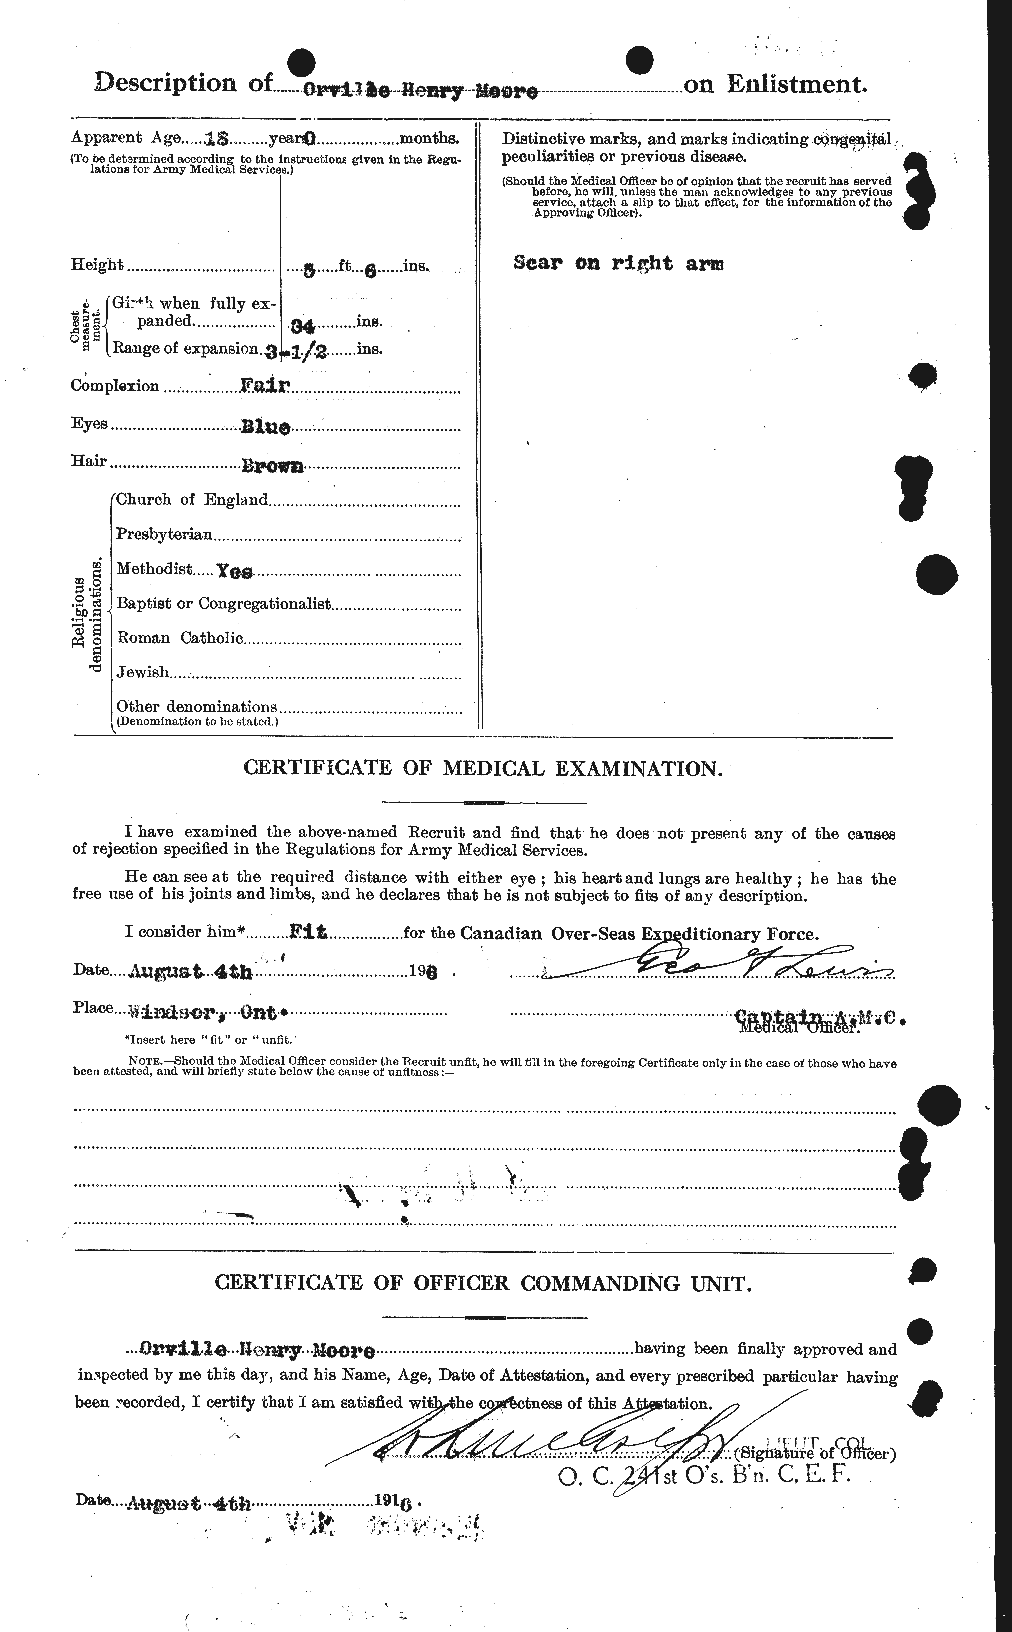 Personnel Records of the First World War - CEF 503470b